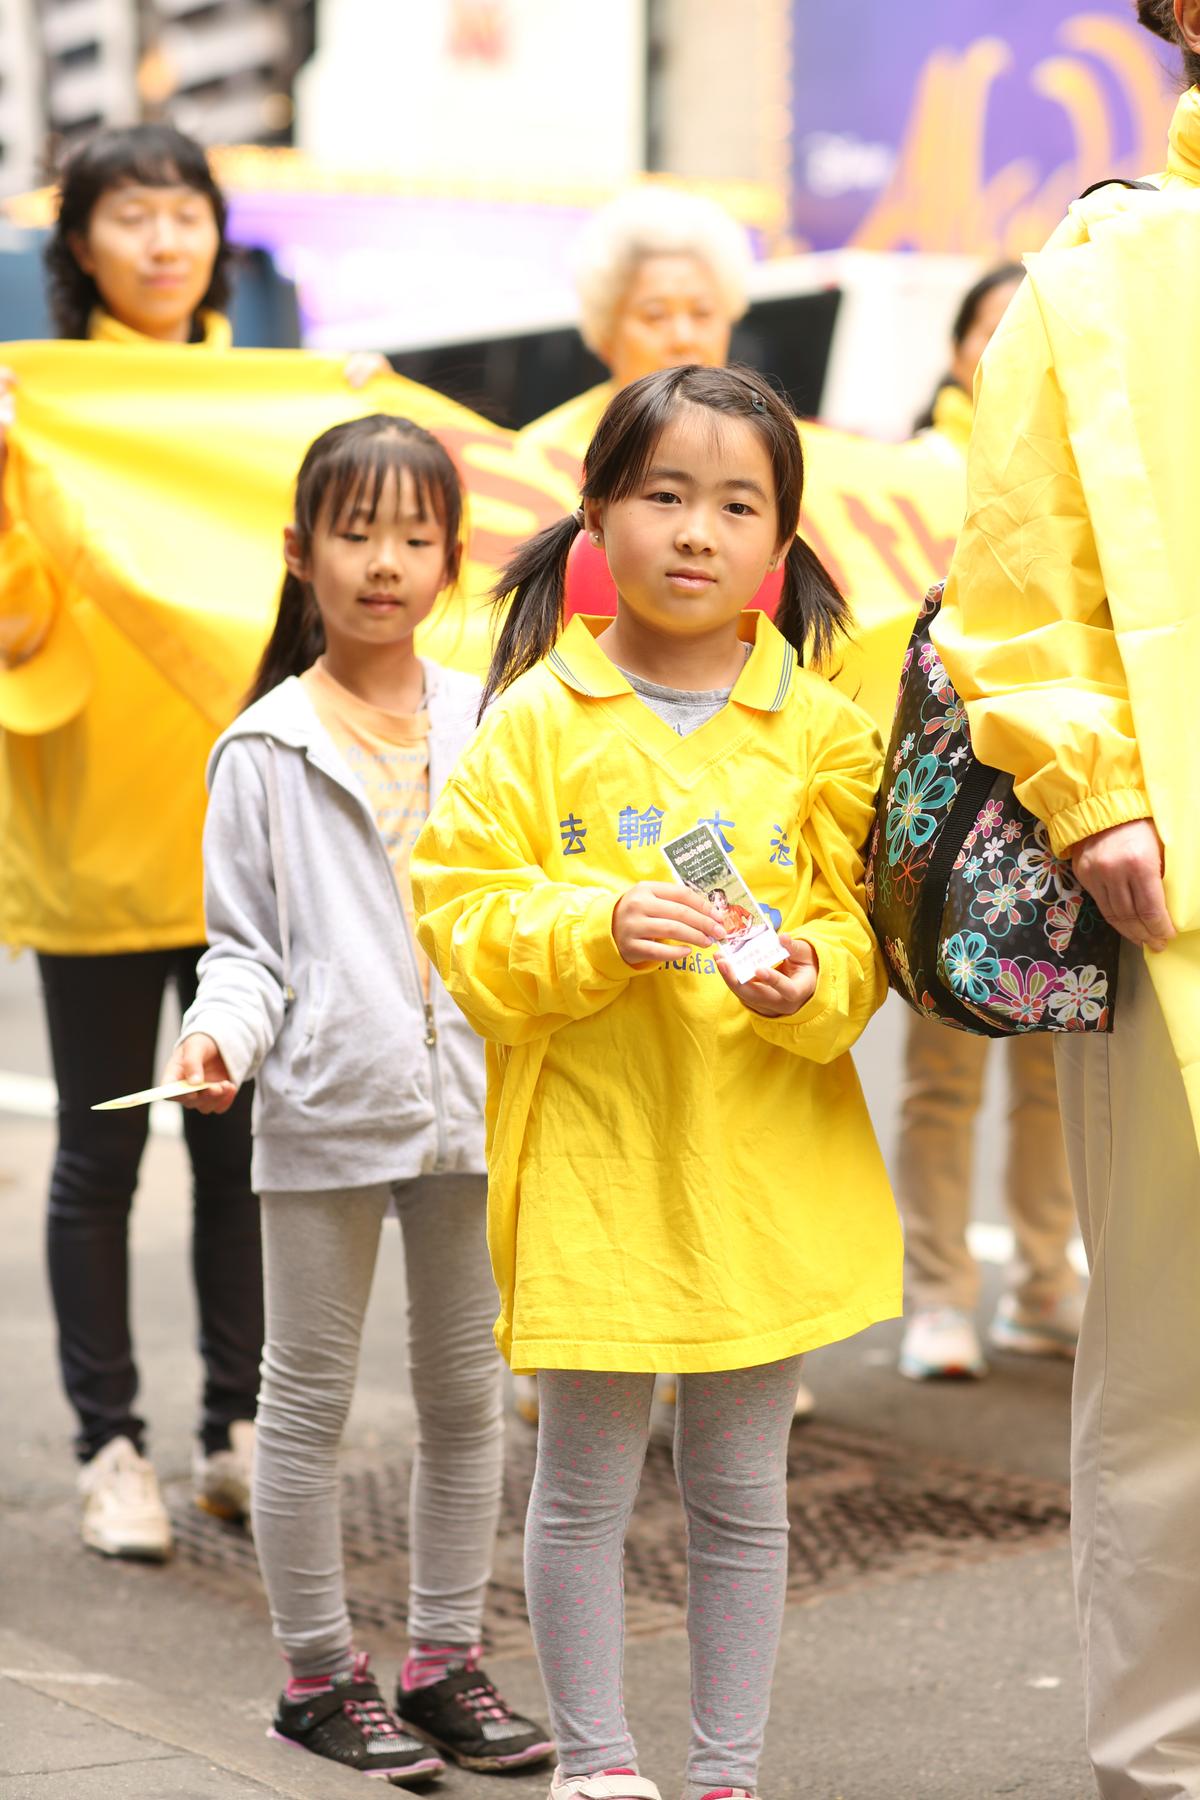 Around 10,000 Falun Gong practitioners march in the World Falun Dafa Day parade in New York on May 13, 2016. (Benjamin Chasteen/Epoch Times)